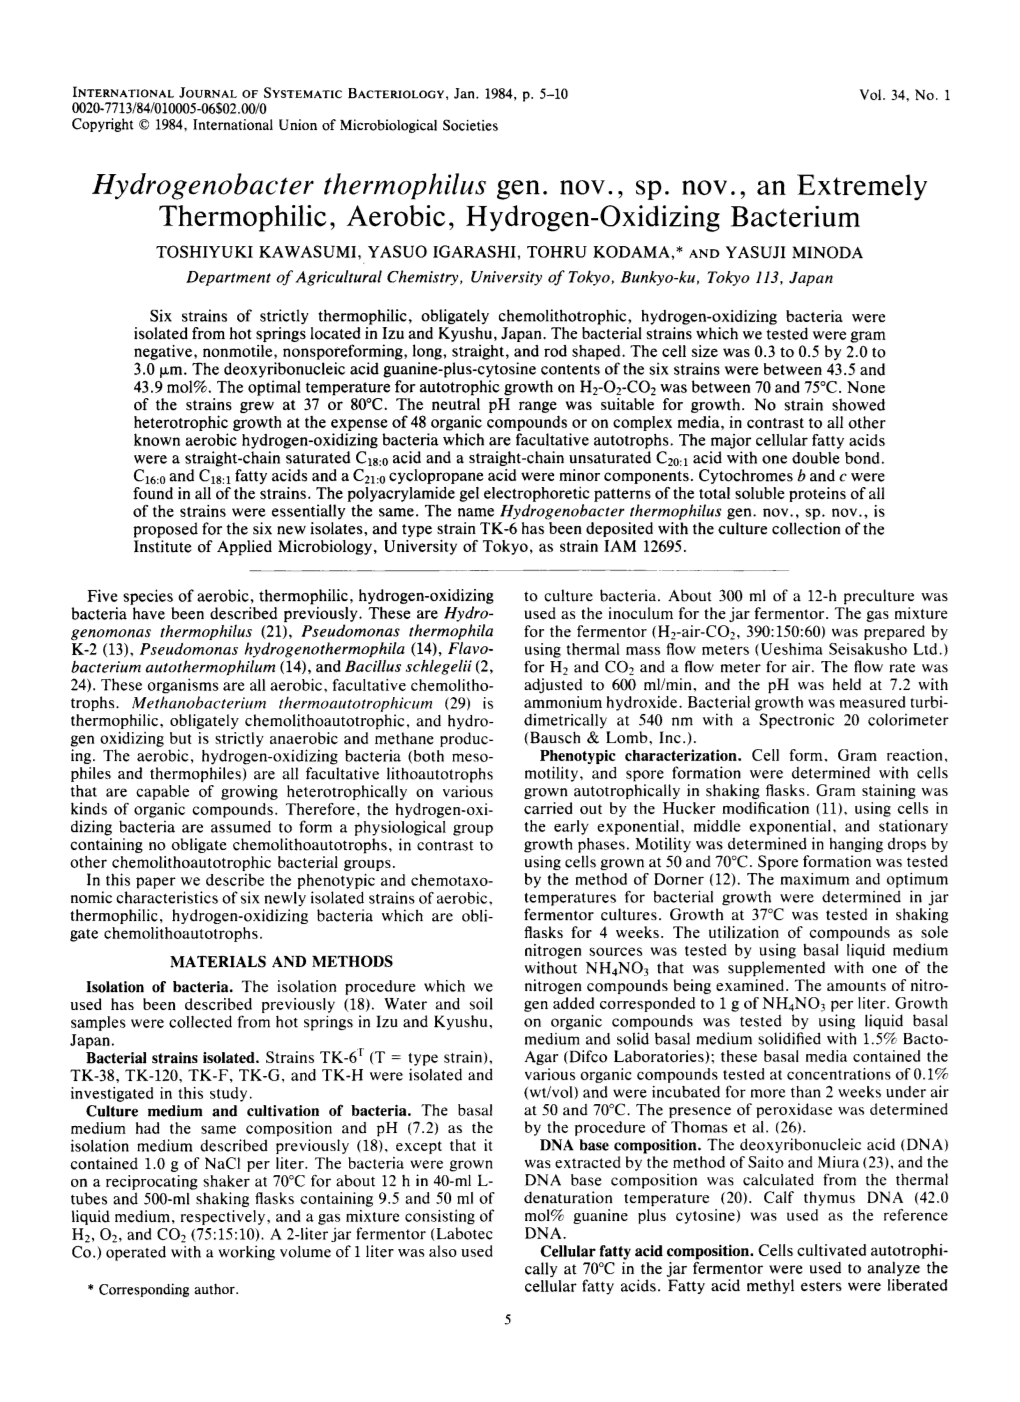 Hydrogenobacter Thermophilus Gen. Nov. , Sp. Nov. , an Extremely Thermophilic, Aerobic, Hydrogen-Oxidizing Bacterium